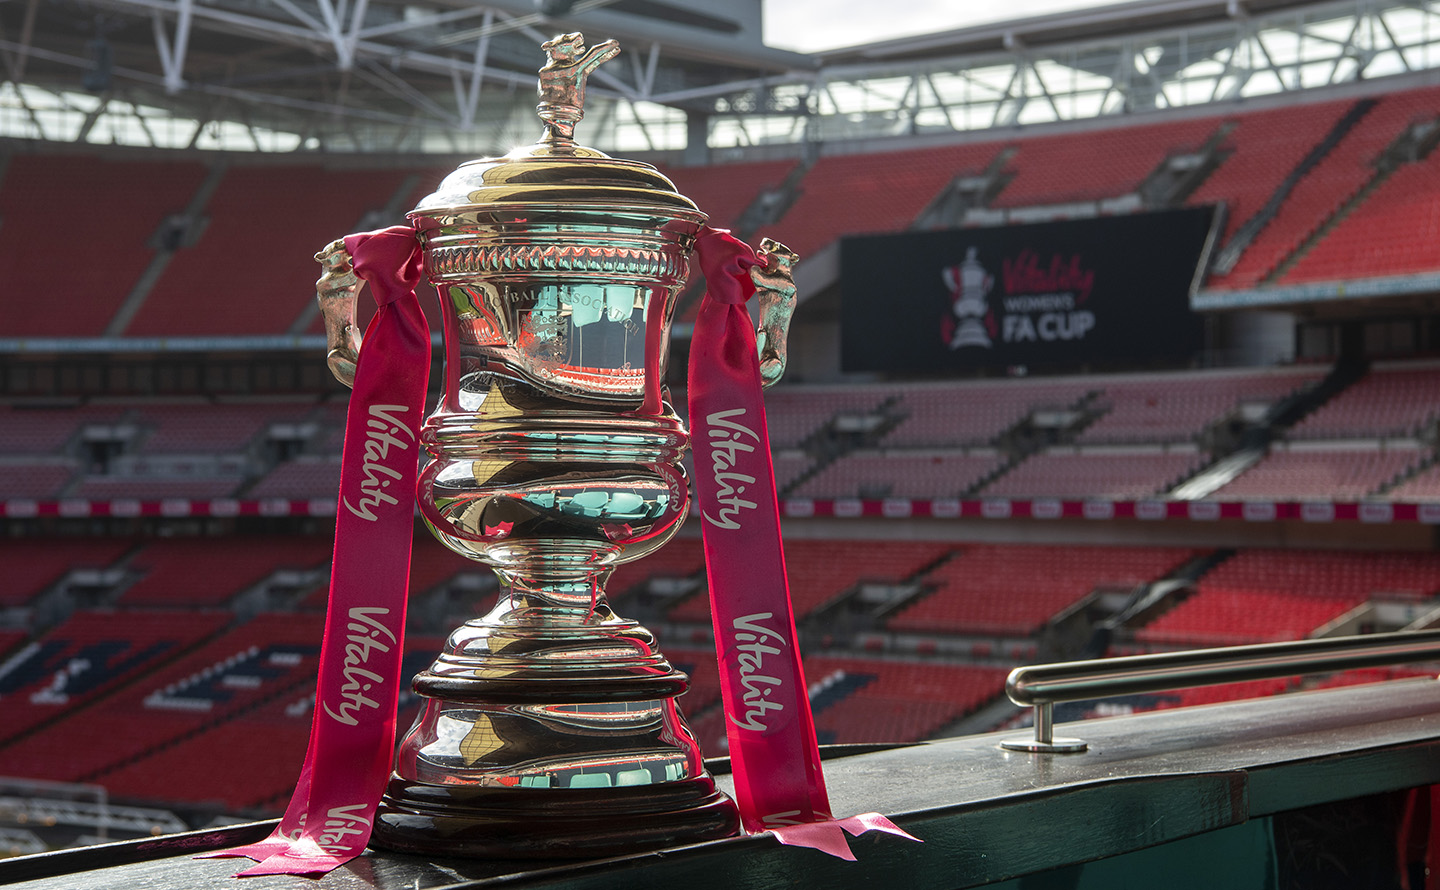 The Vitality Women's FA Cup trophy